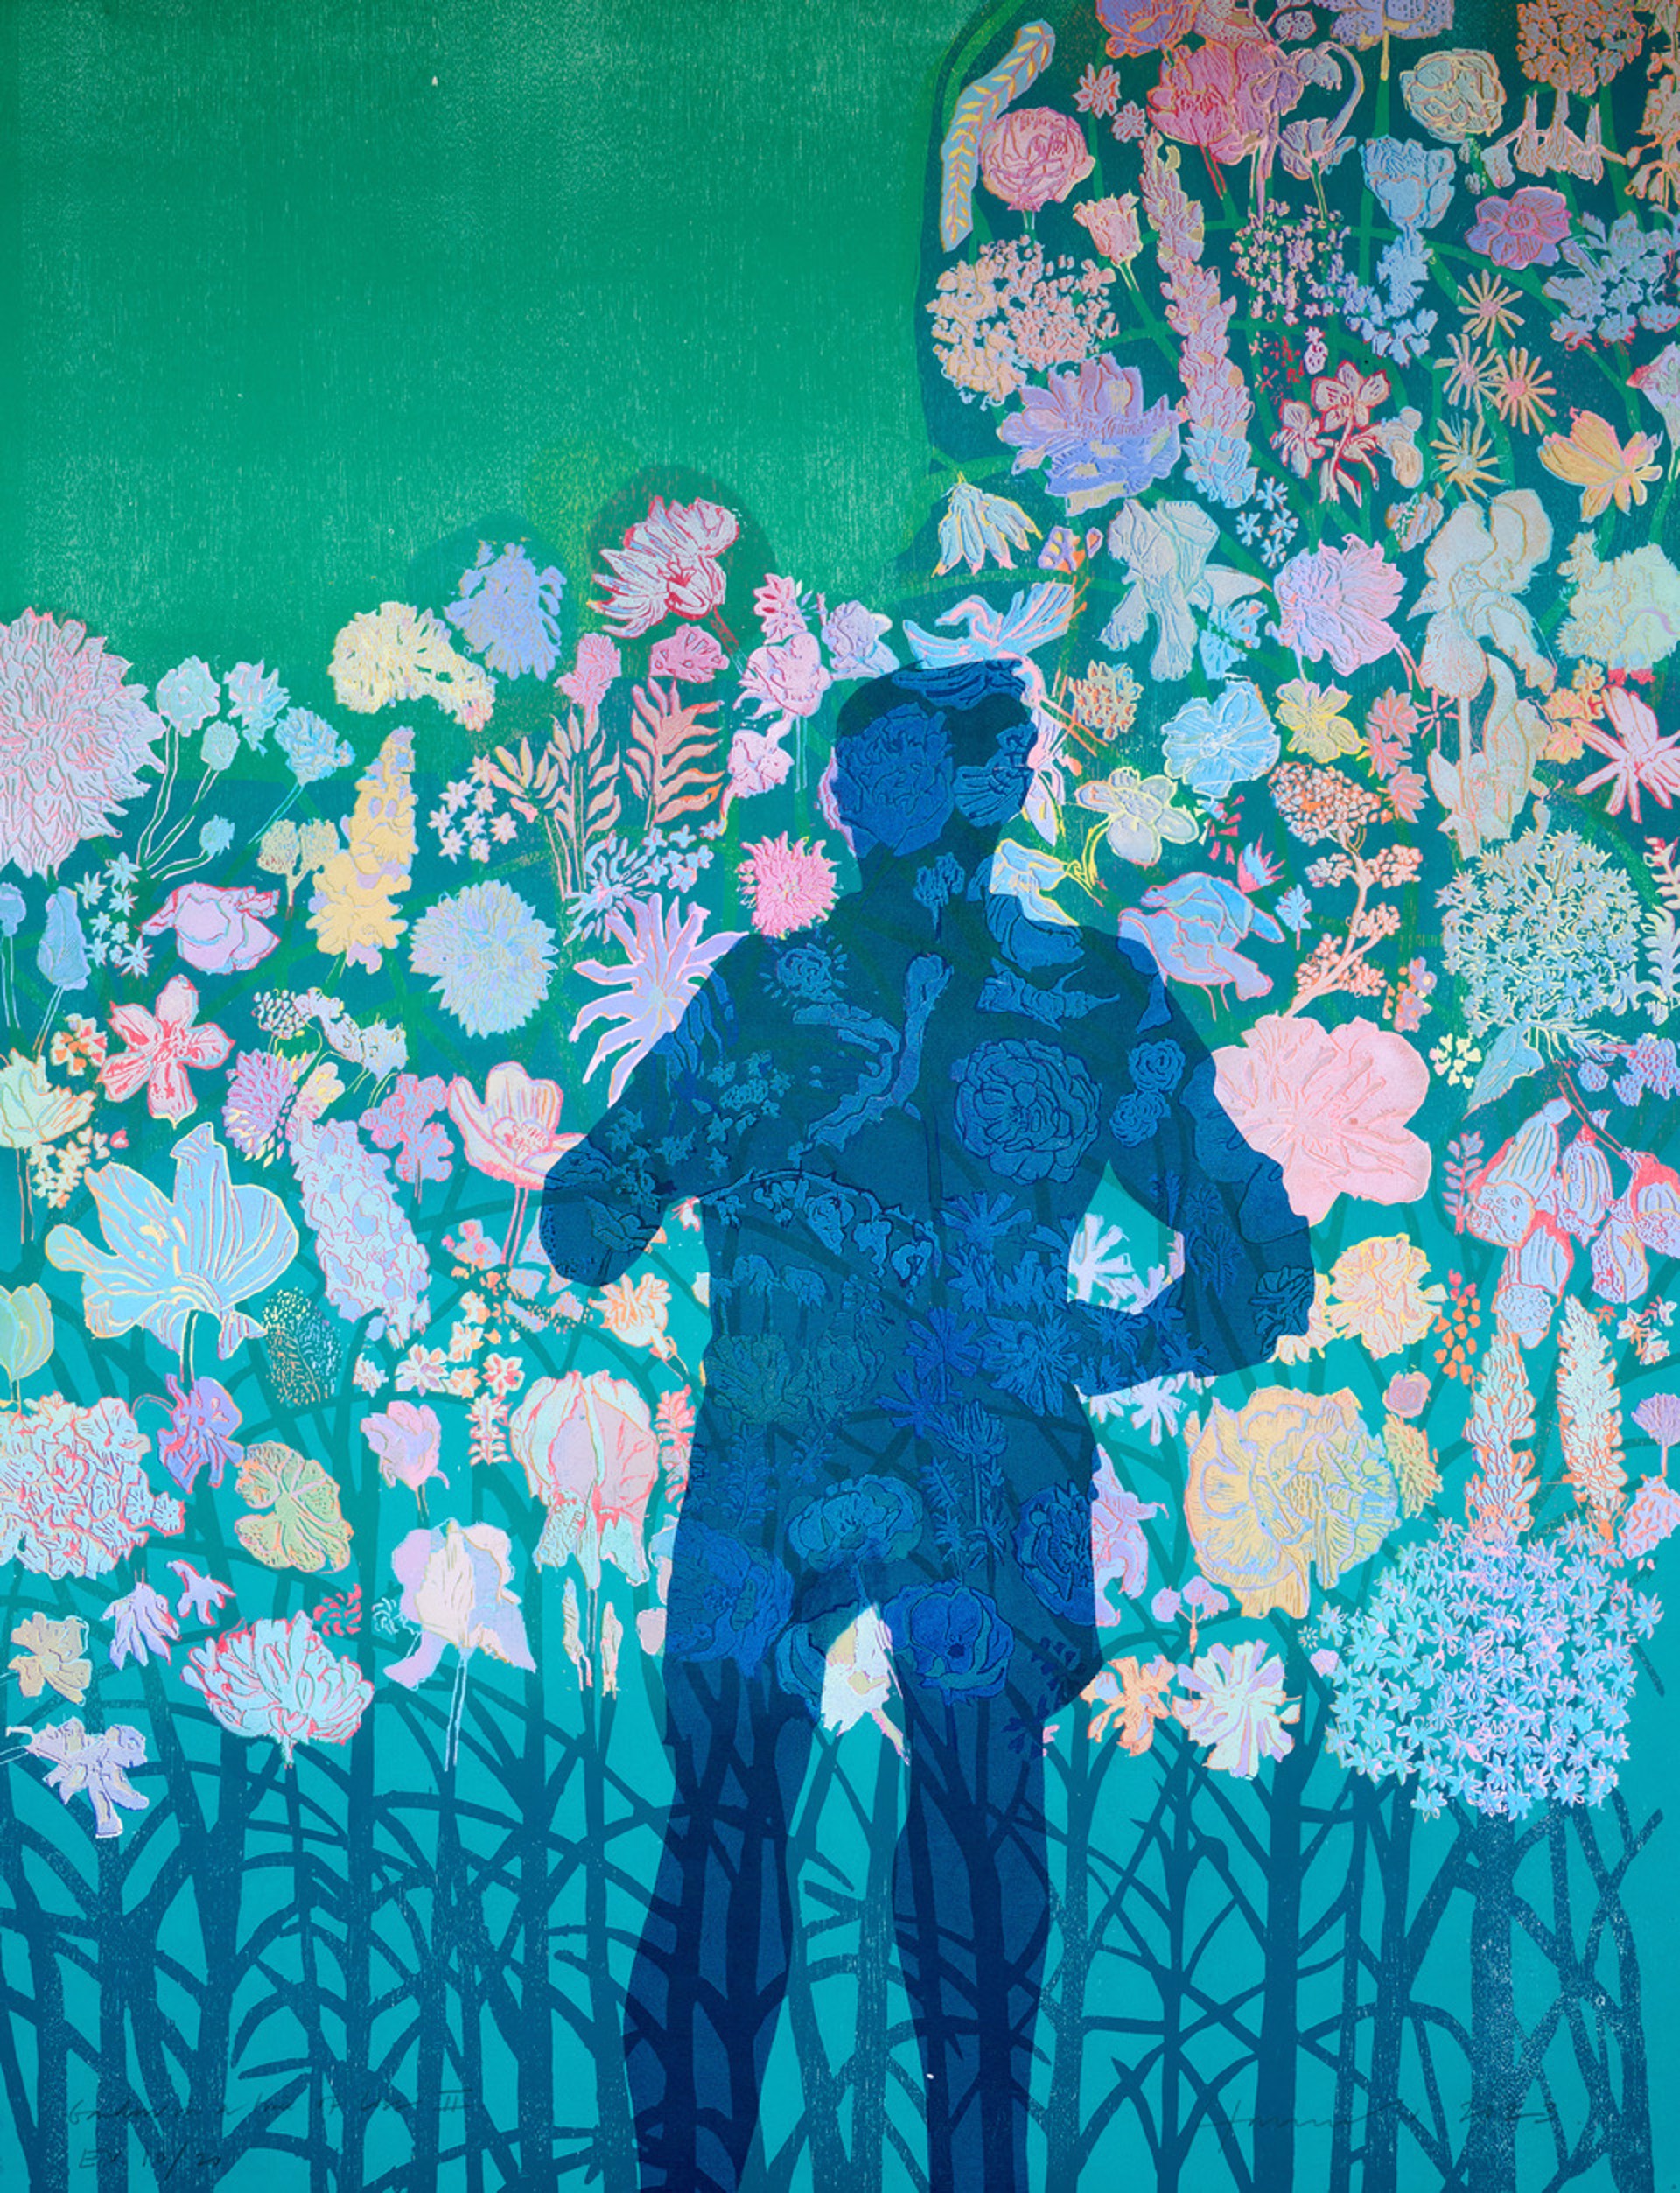 Garden in a Time of Loss II by Tom Hammick